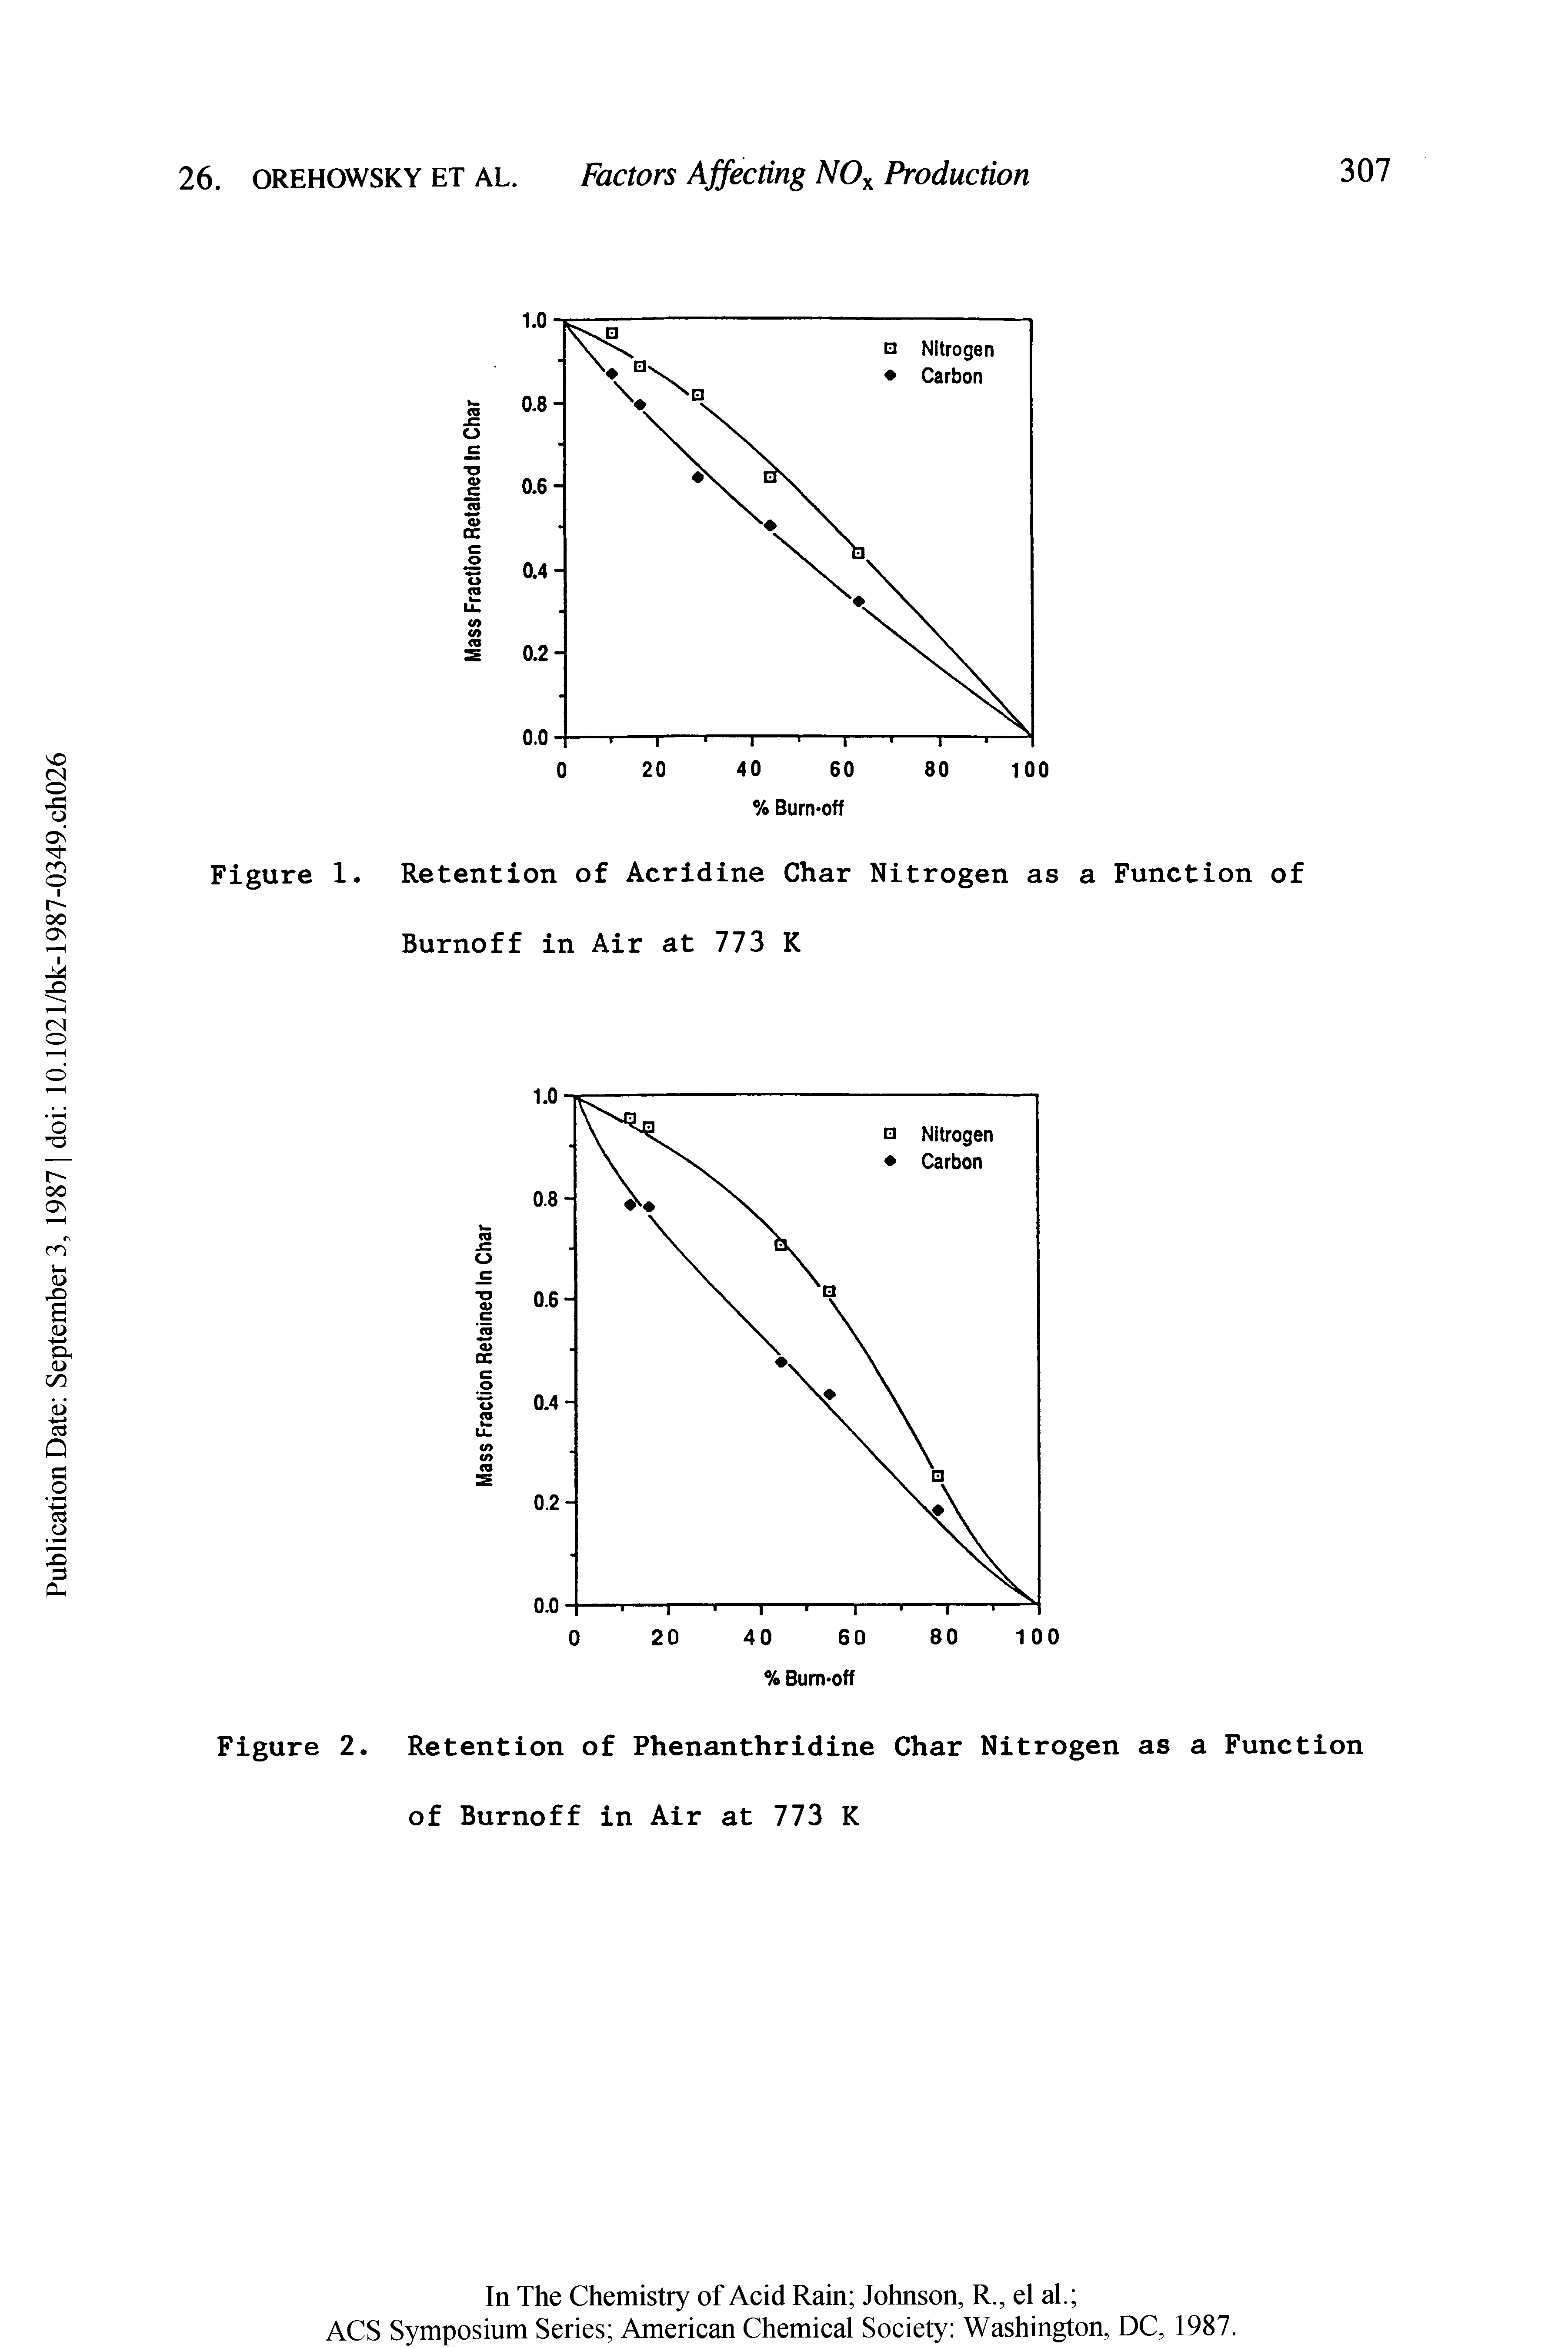 Figure 1. Retention of Acridine Char Nitrogen as a Function of Burnoff in Air at 773 K...